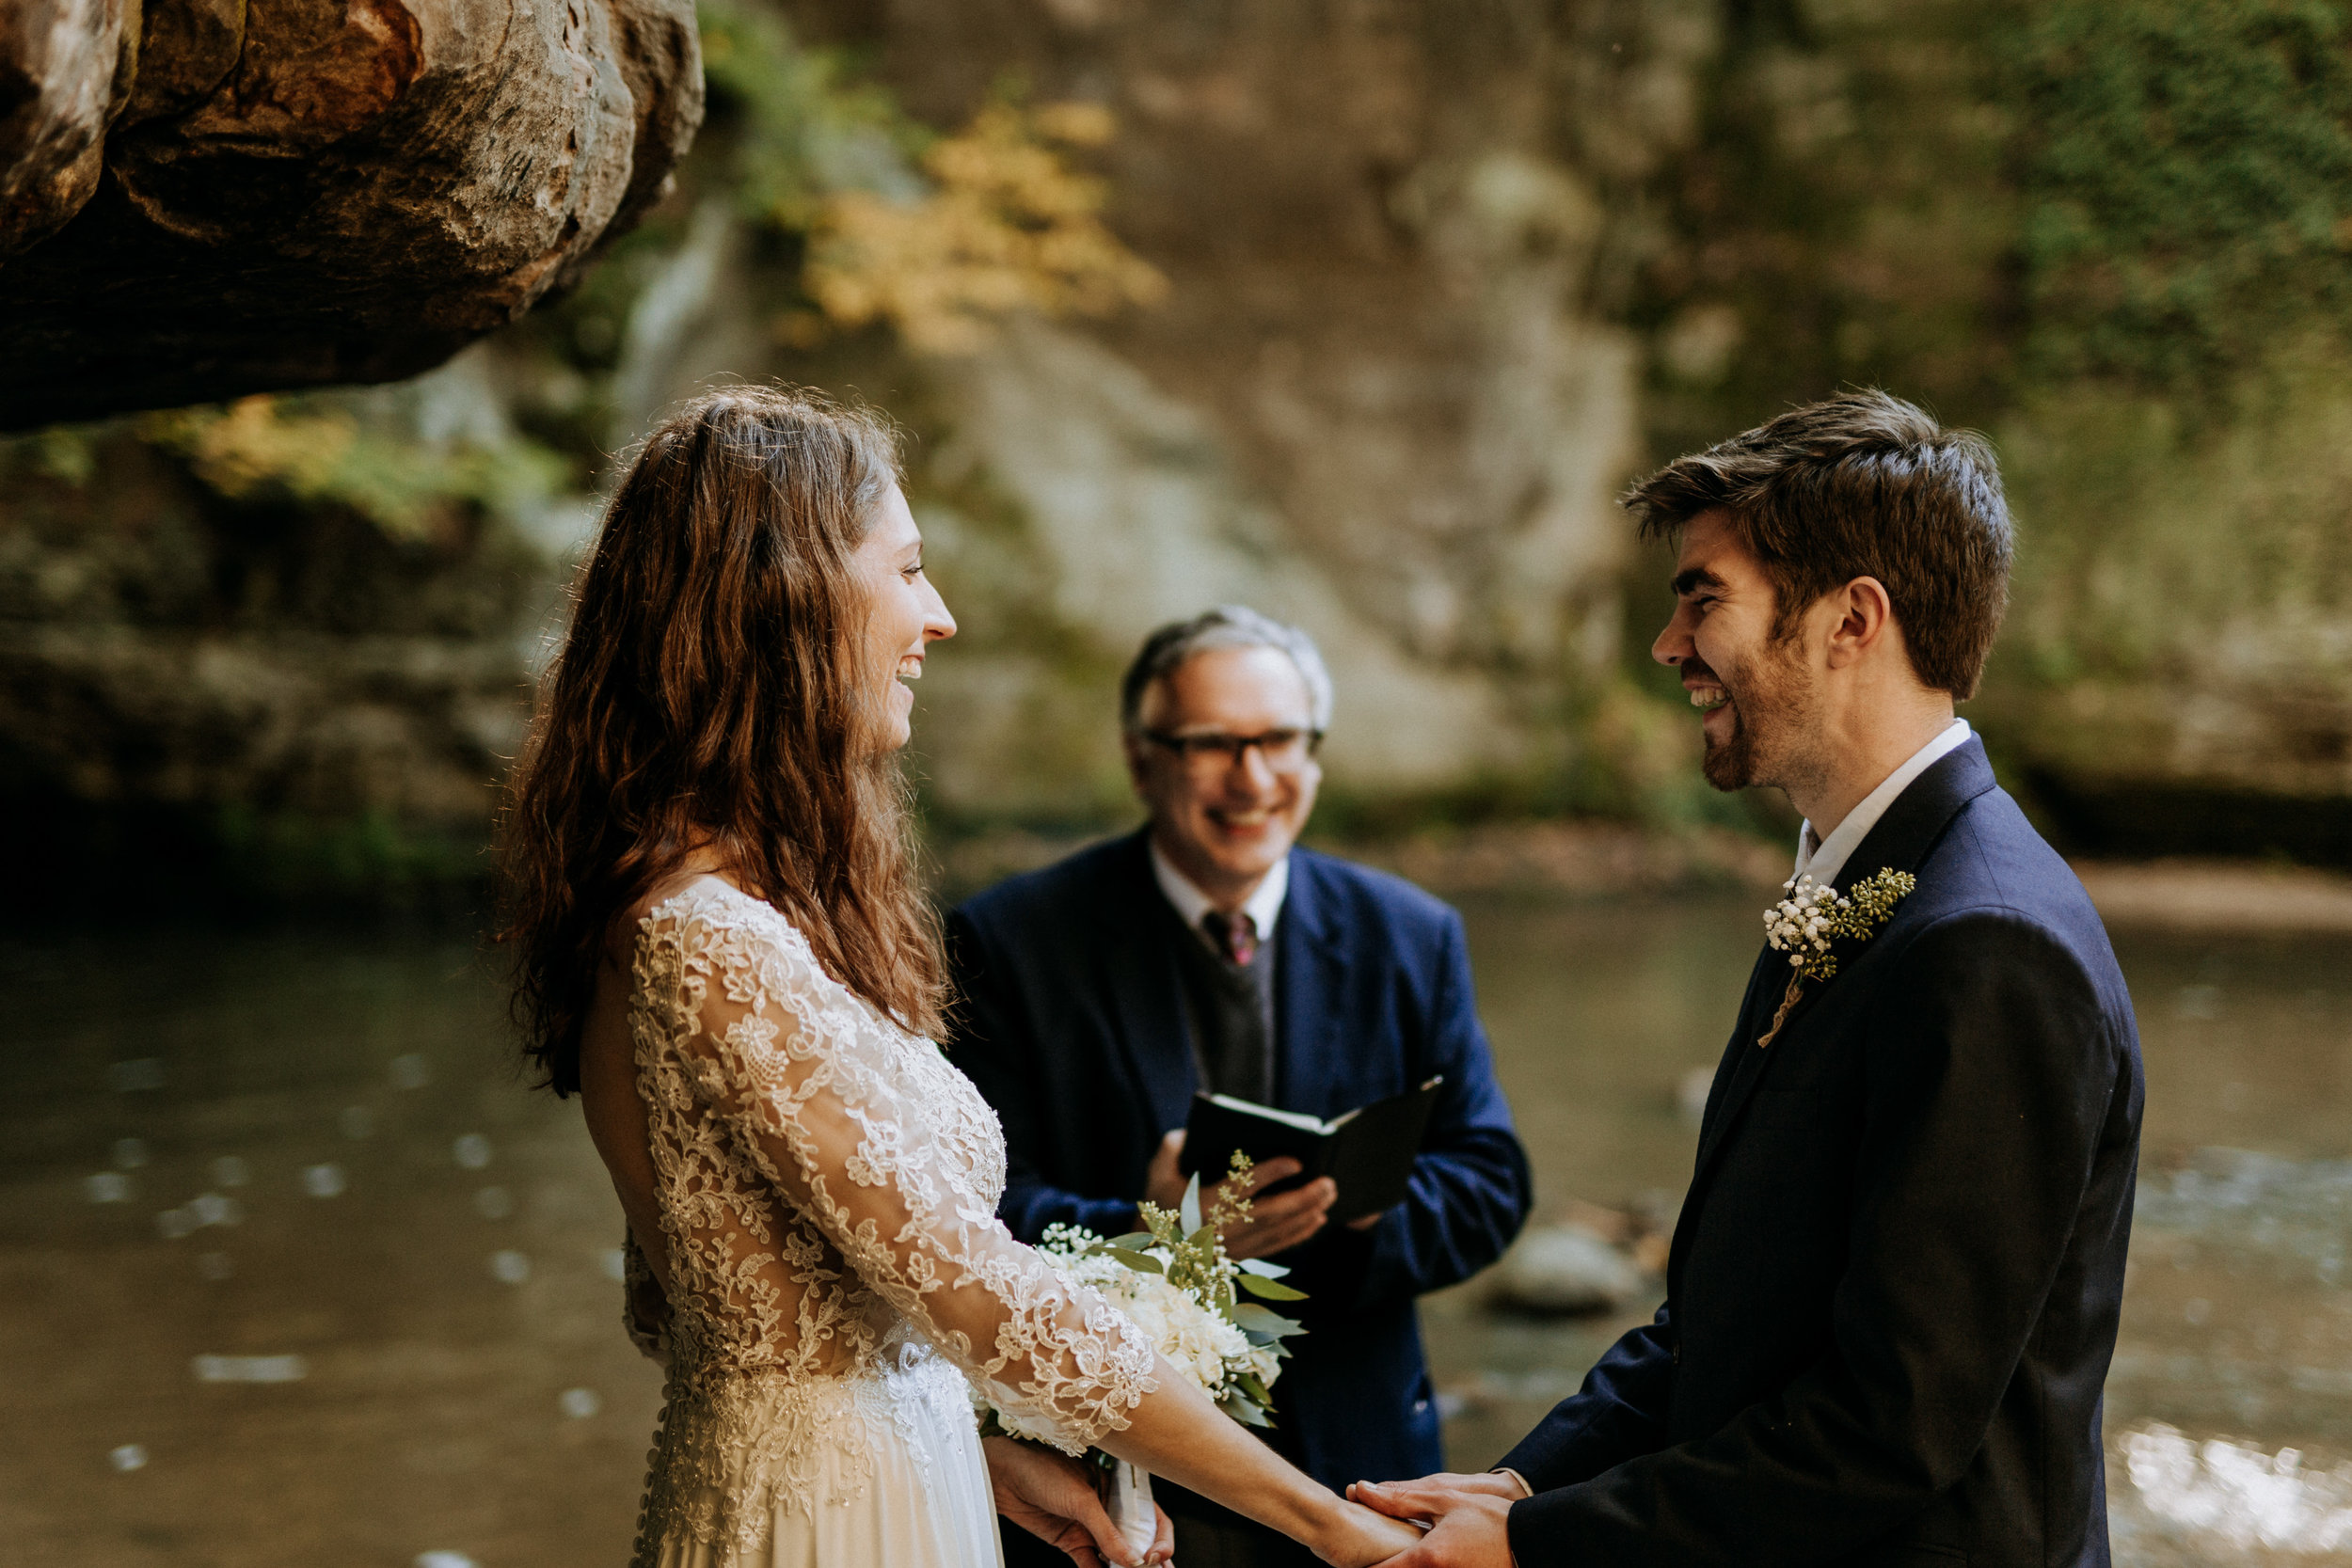 outdoor-adventure-elopement-vow-ceremony-Pewitts-nest-WI-Narrowleaf_Love_and_Adventure_Photography-0100.jpg